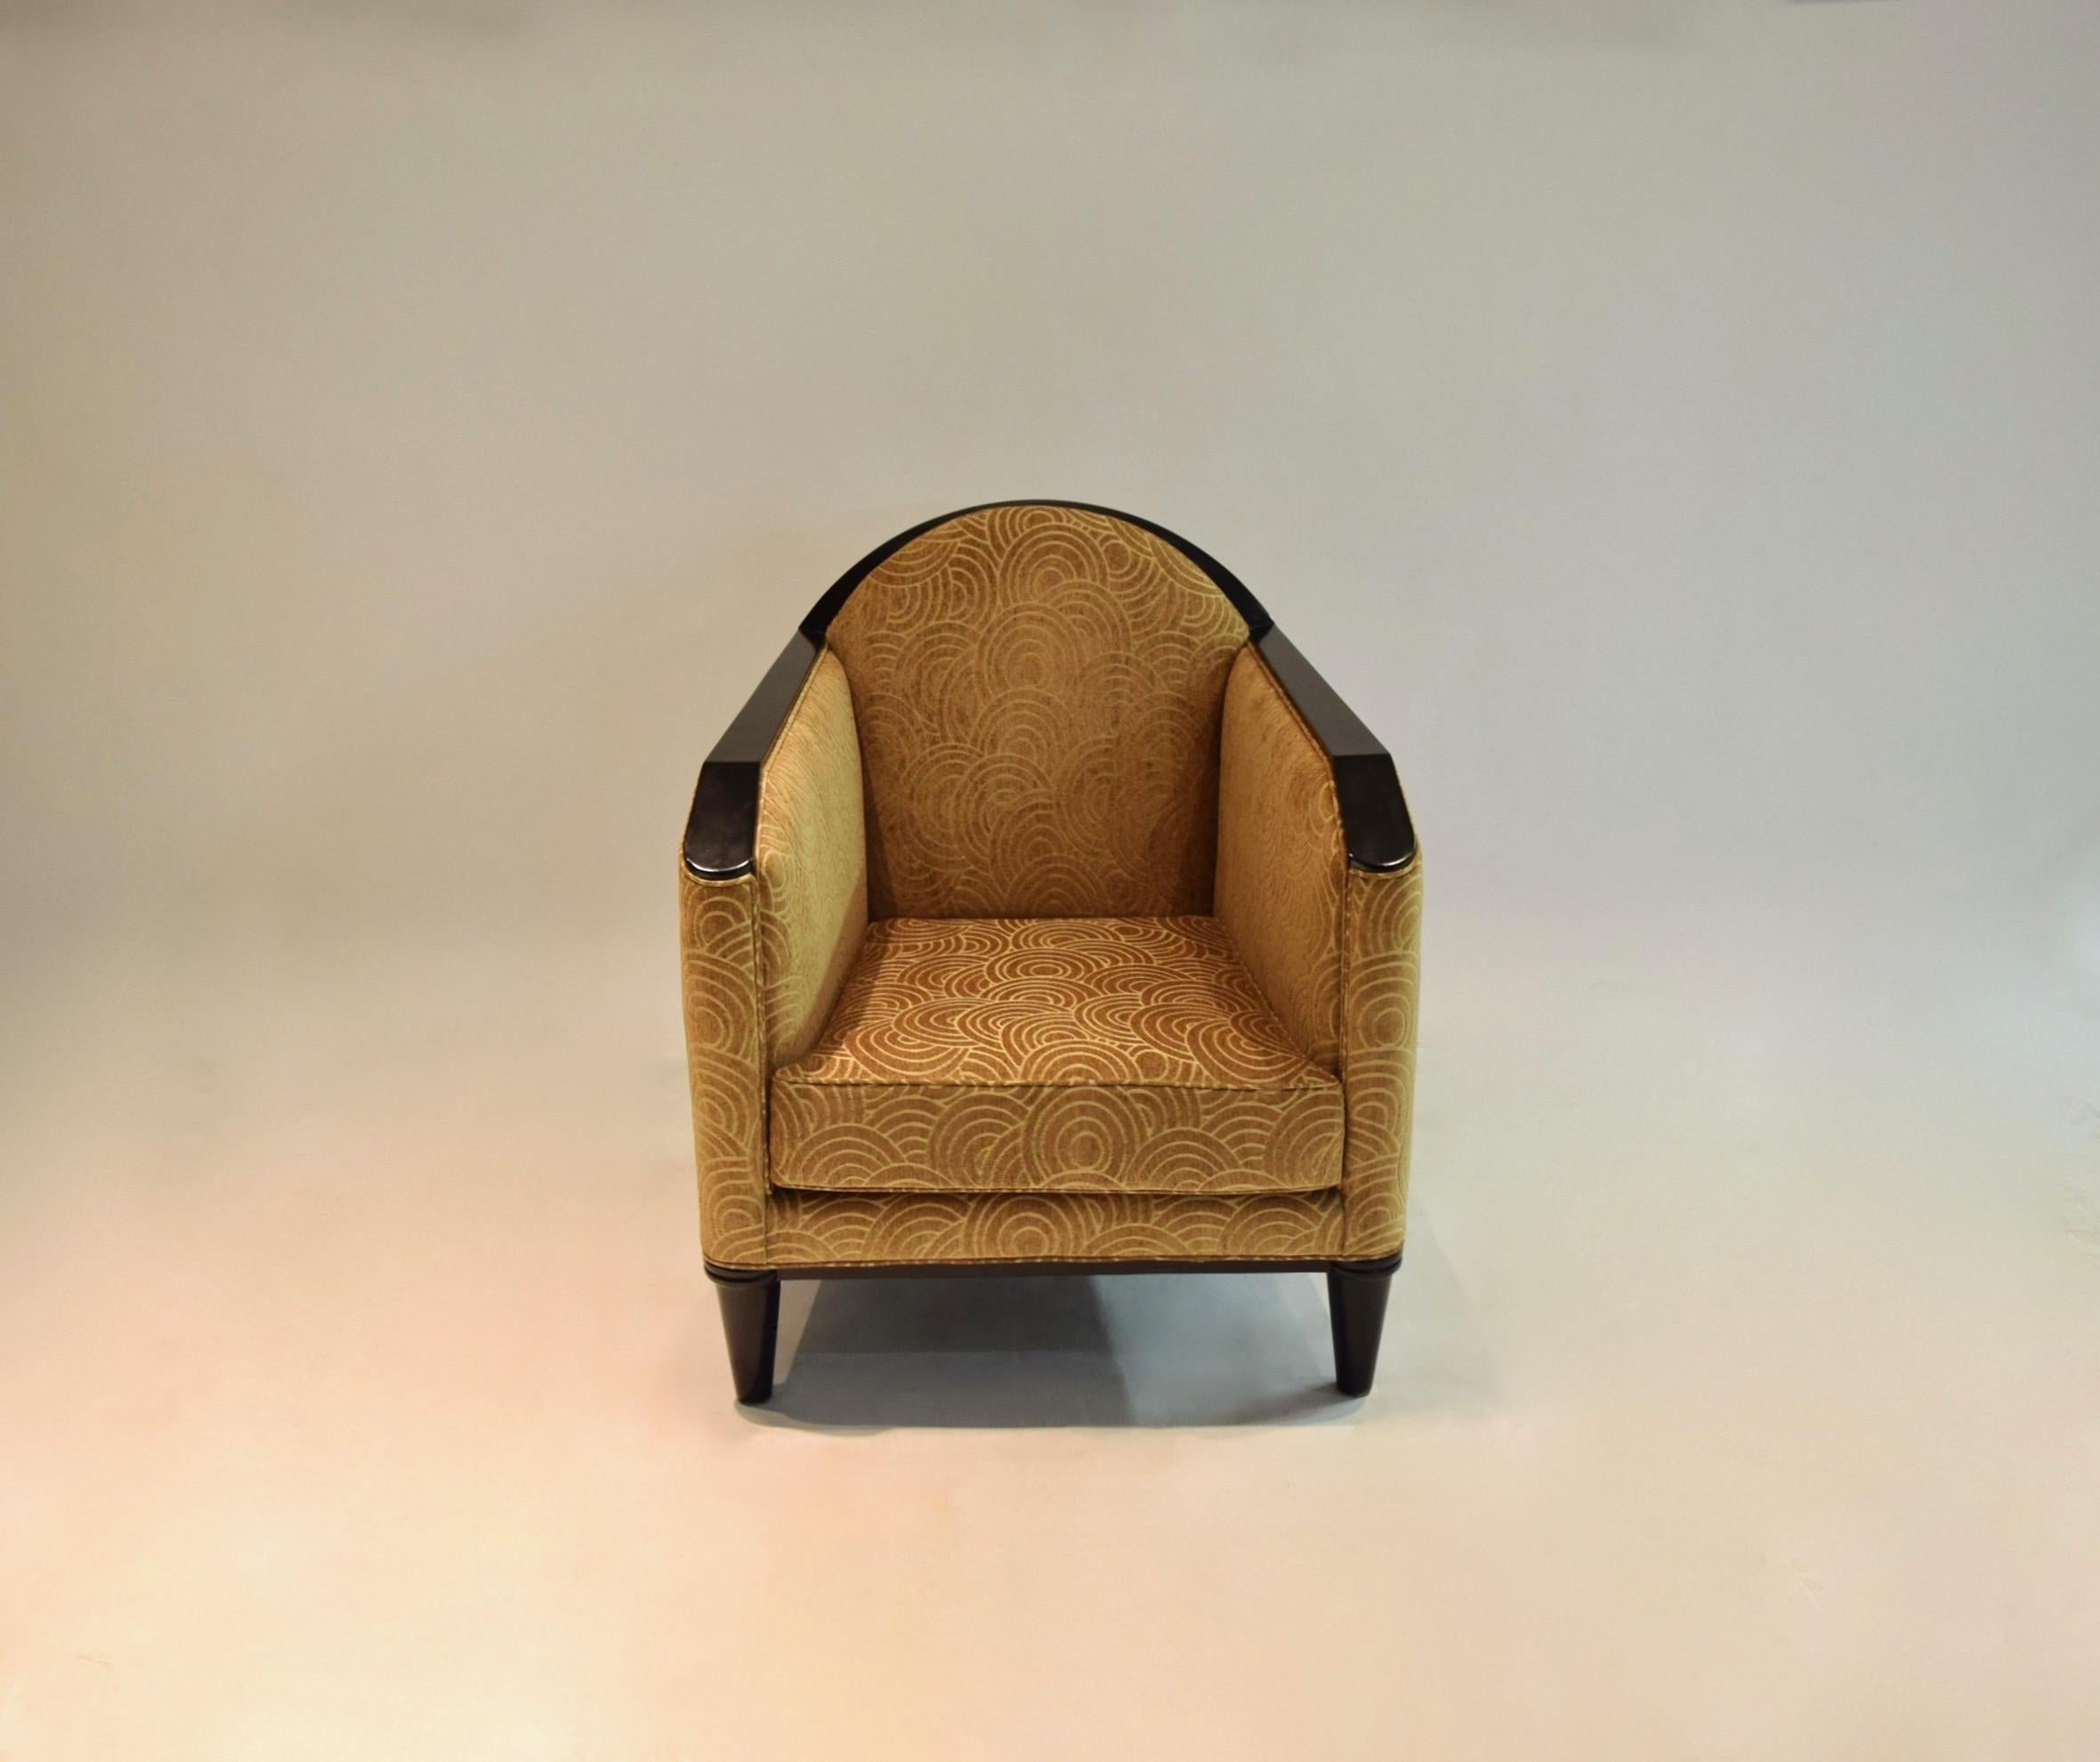 Elegant, period-deco lounge chair restored in a black-ebony finish and reupholstered in a golden hued jacquard fabric, retaining its original spring structure and wooden frame. The arm height is 65.5 cm.